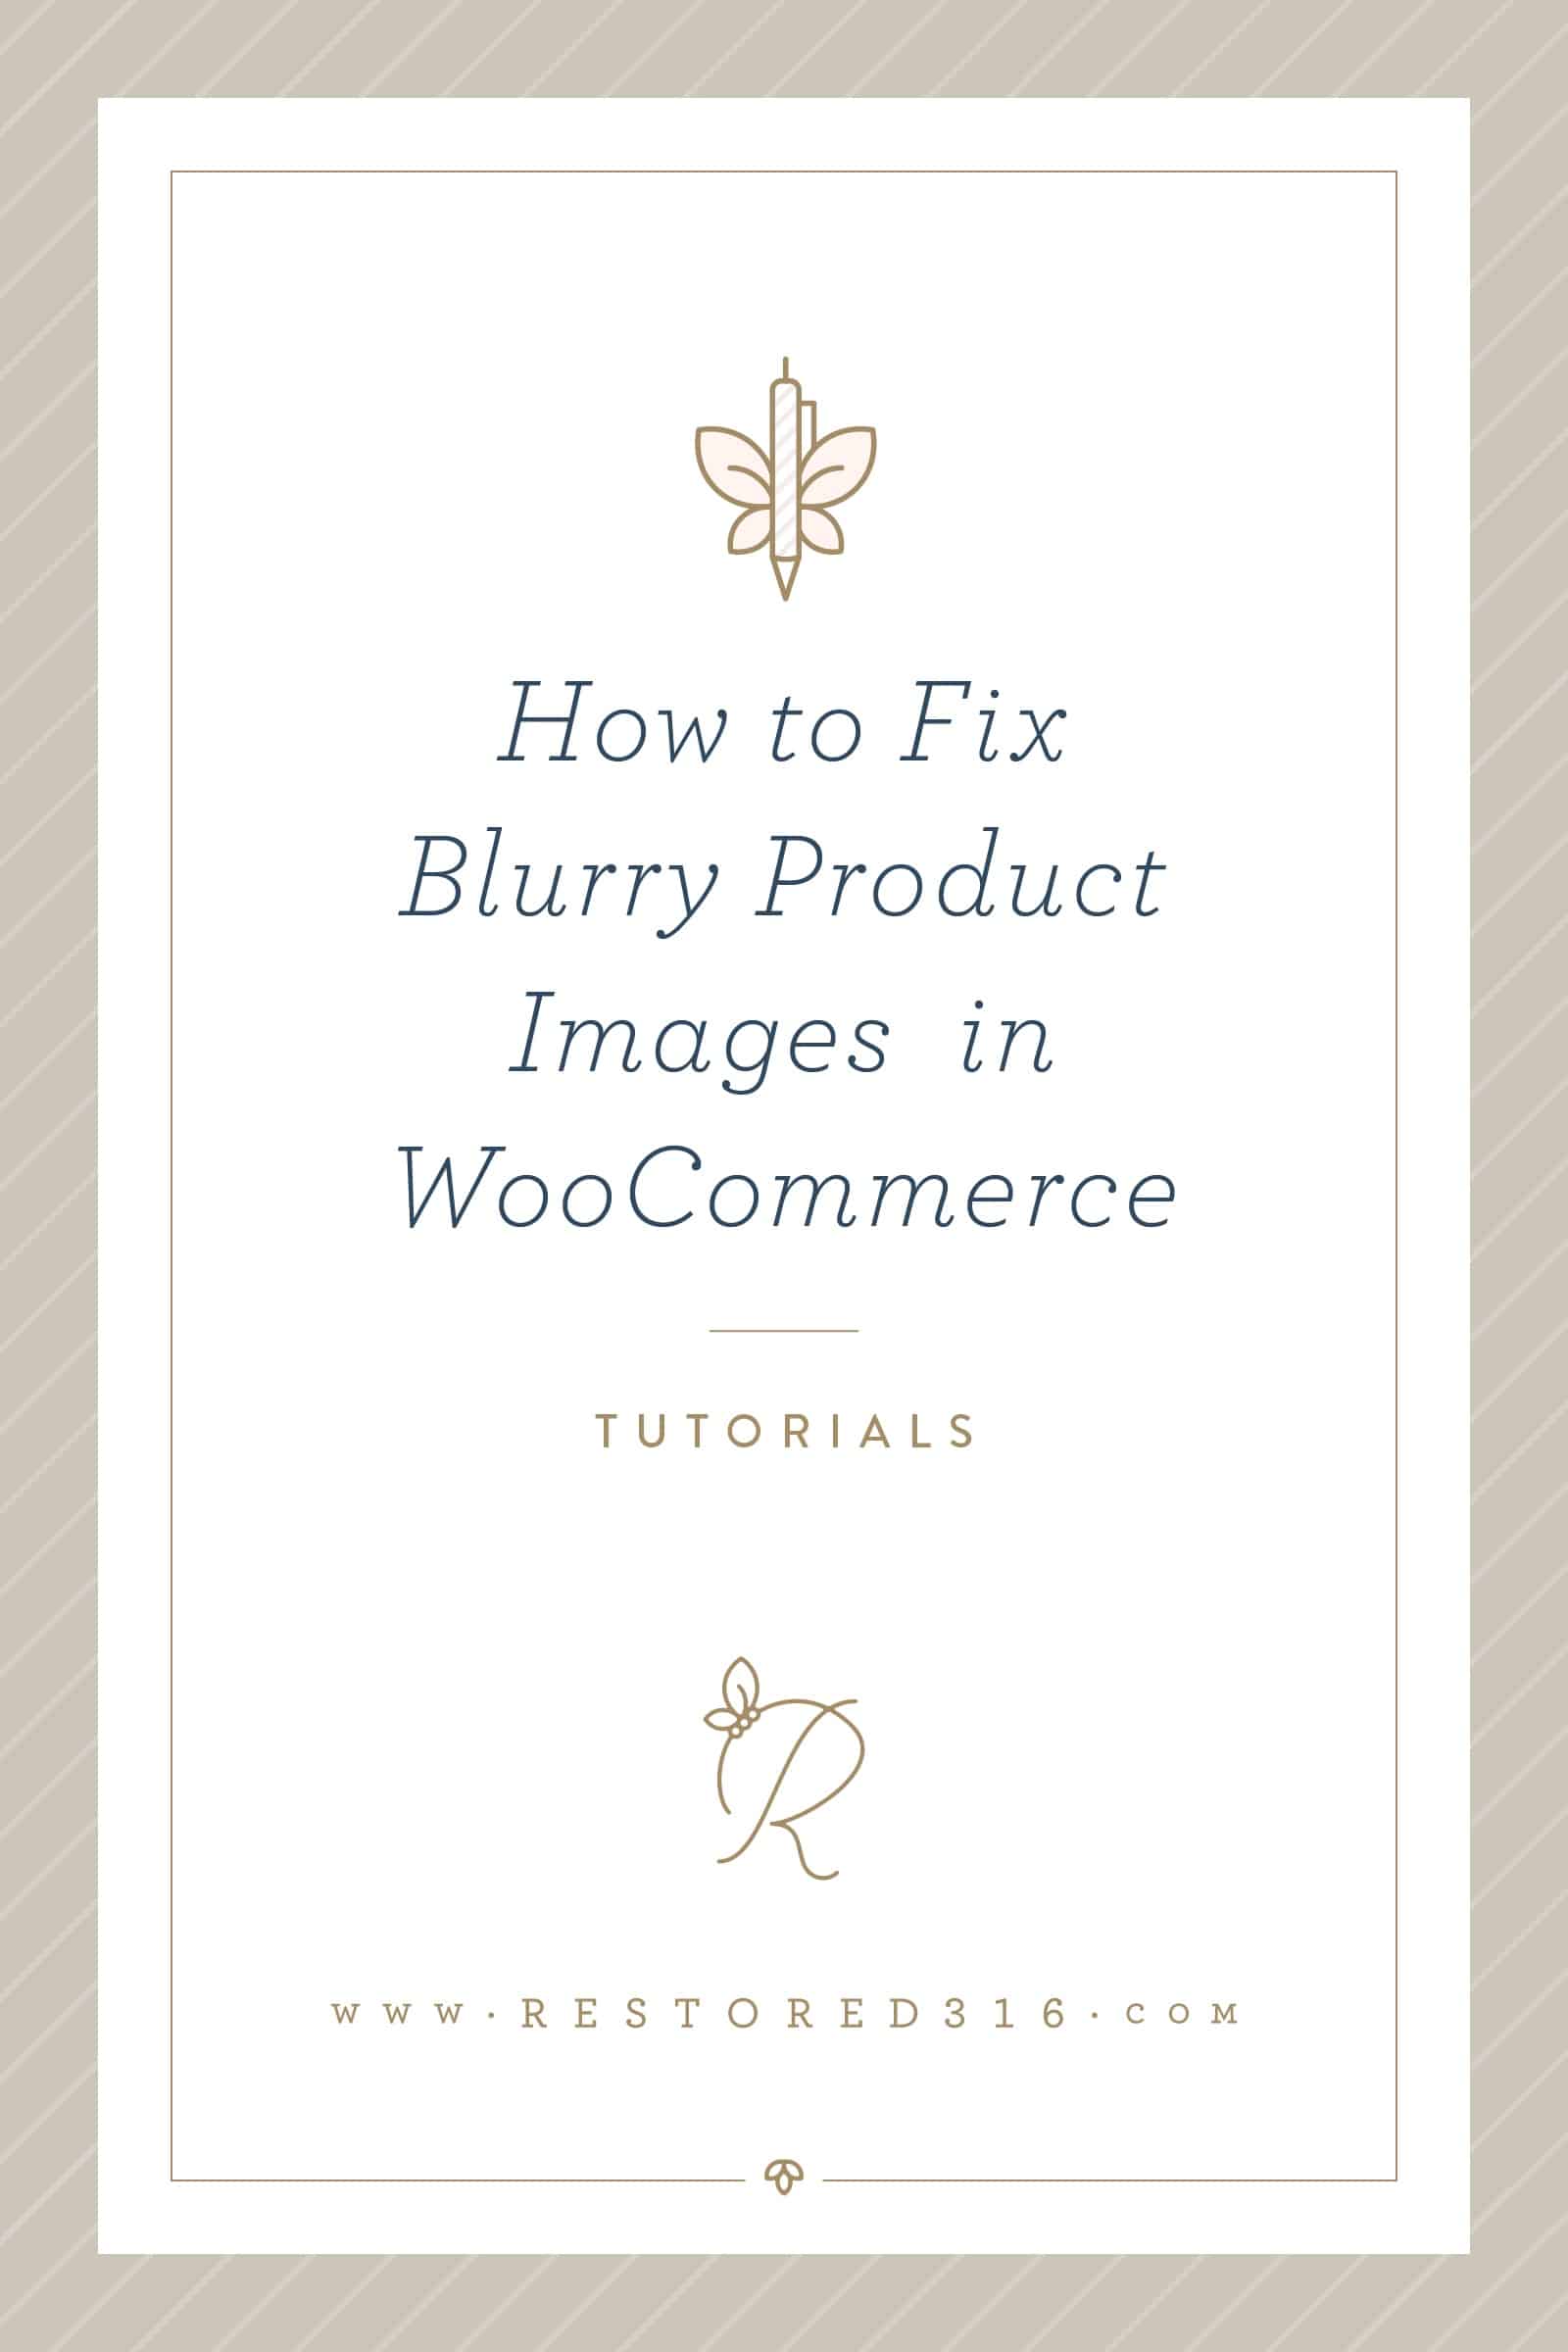 How to fix blurry product images in WooCommerce